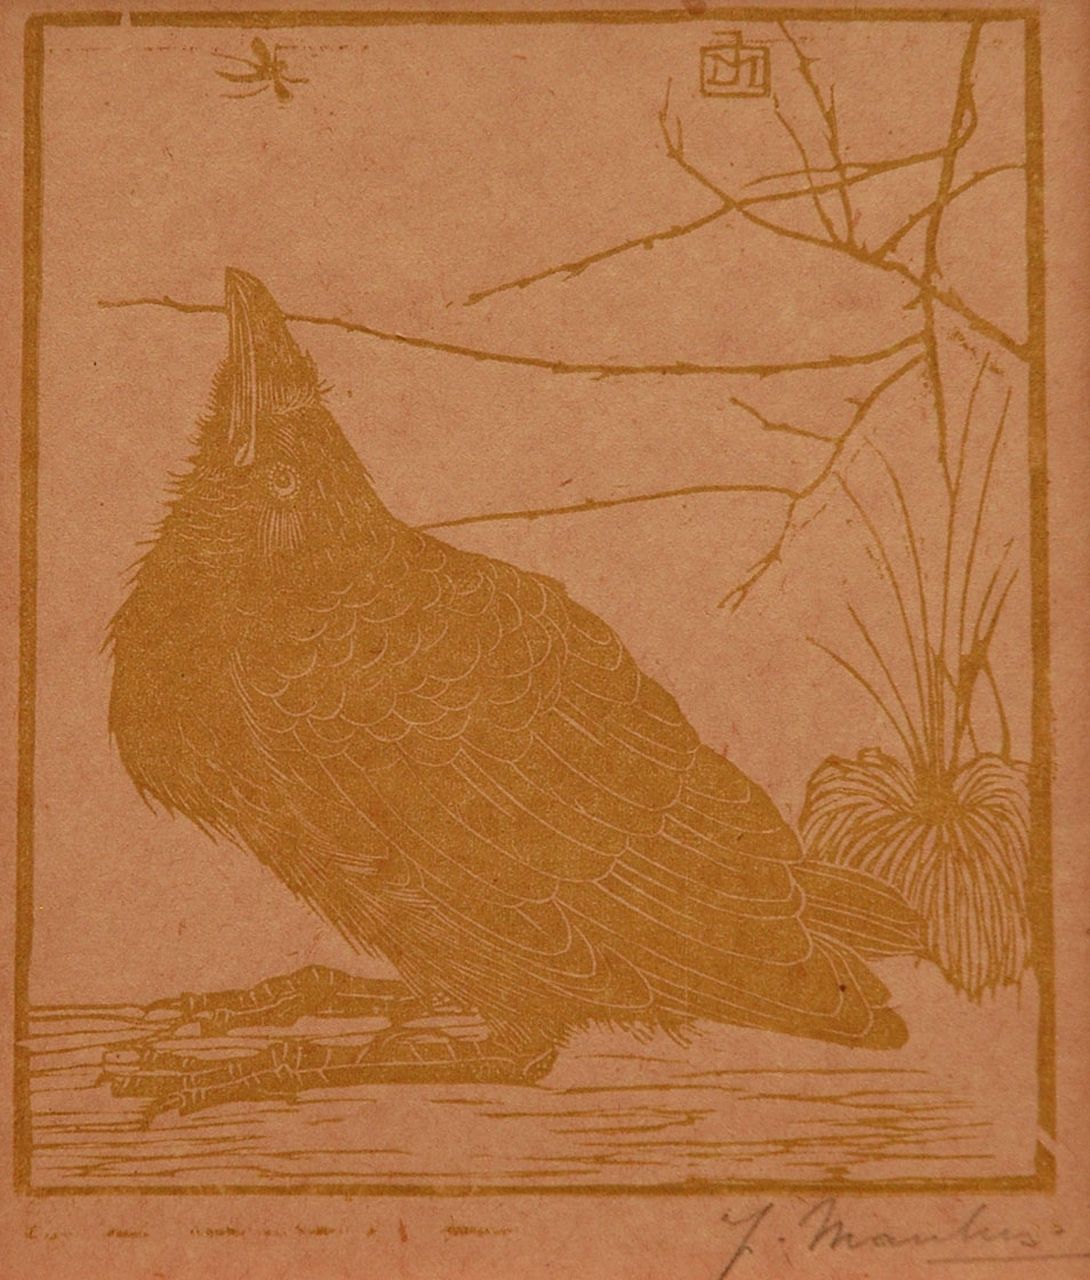 Mankes J.  | Jan Mankes, A crow, watching a mosquito, woodcut on coloured Japanese paper 11.8 x 10.2 cm, signed w mon in the block and l.r. in full (in pencil and executed in 1918